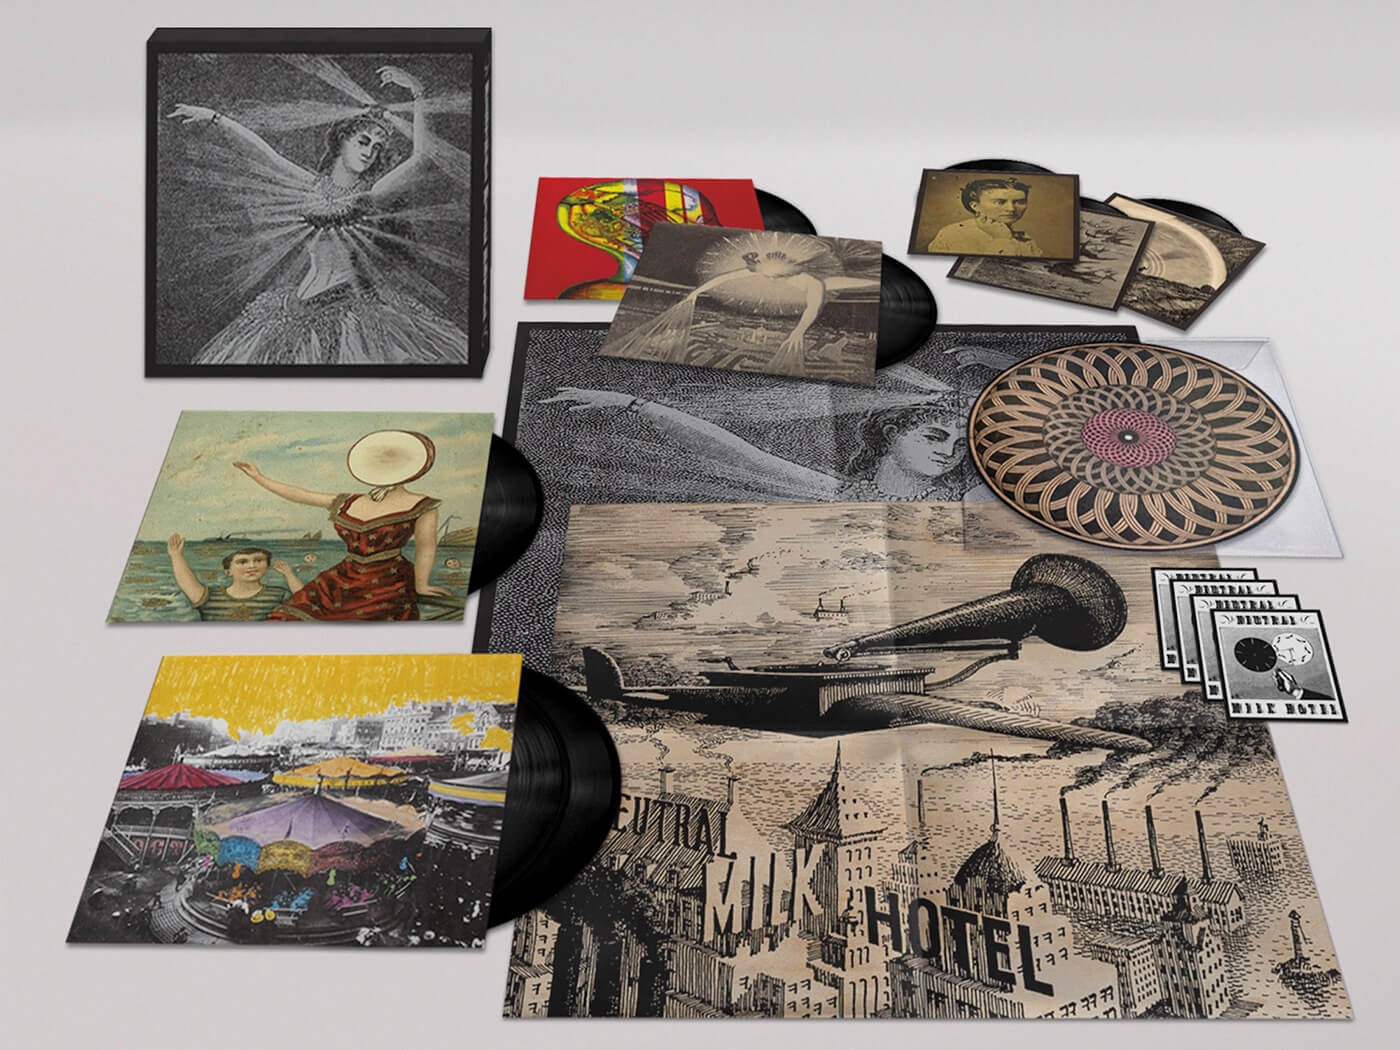 'The Collected Works of Neutral Milk Hotel' vinyl box set